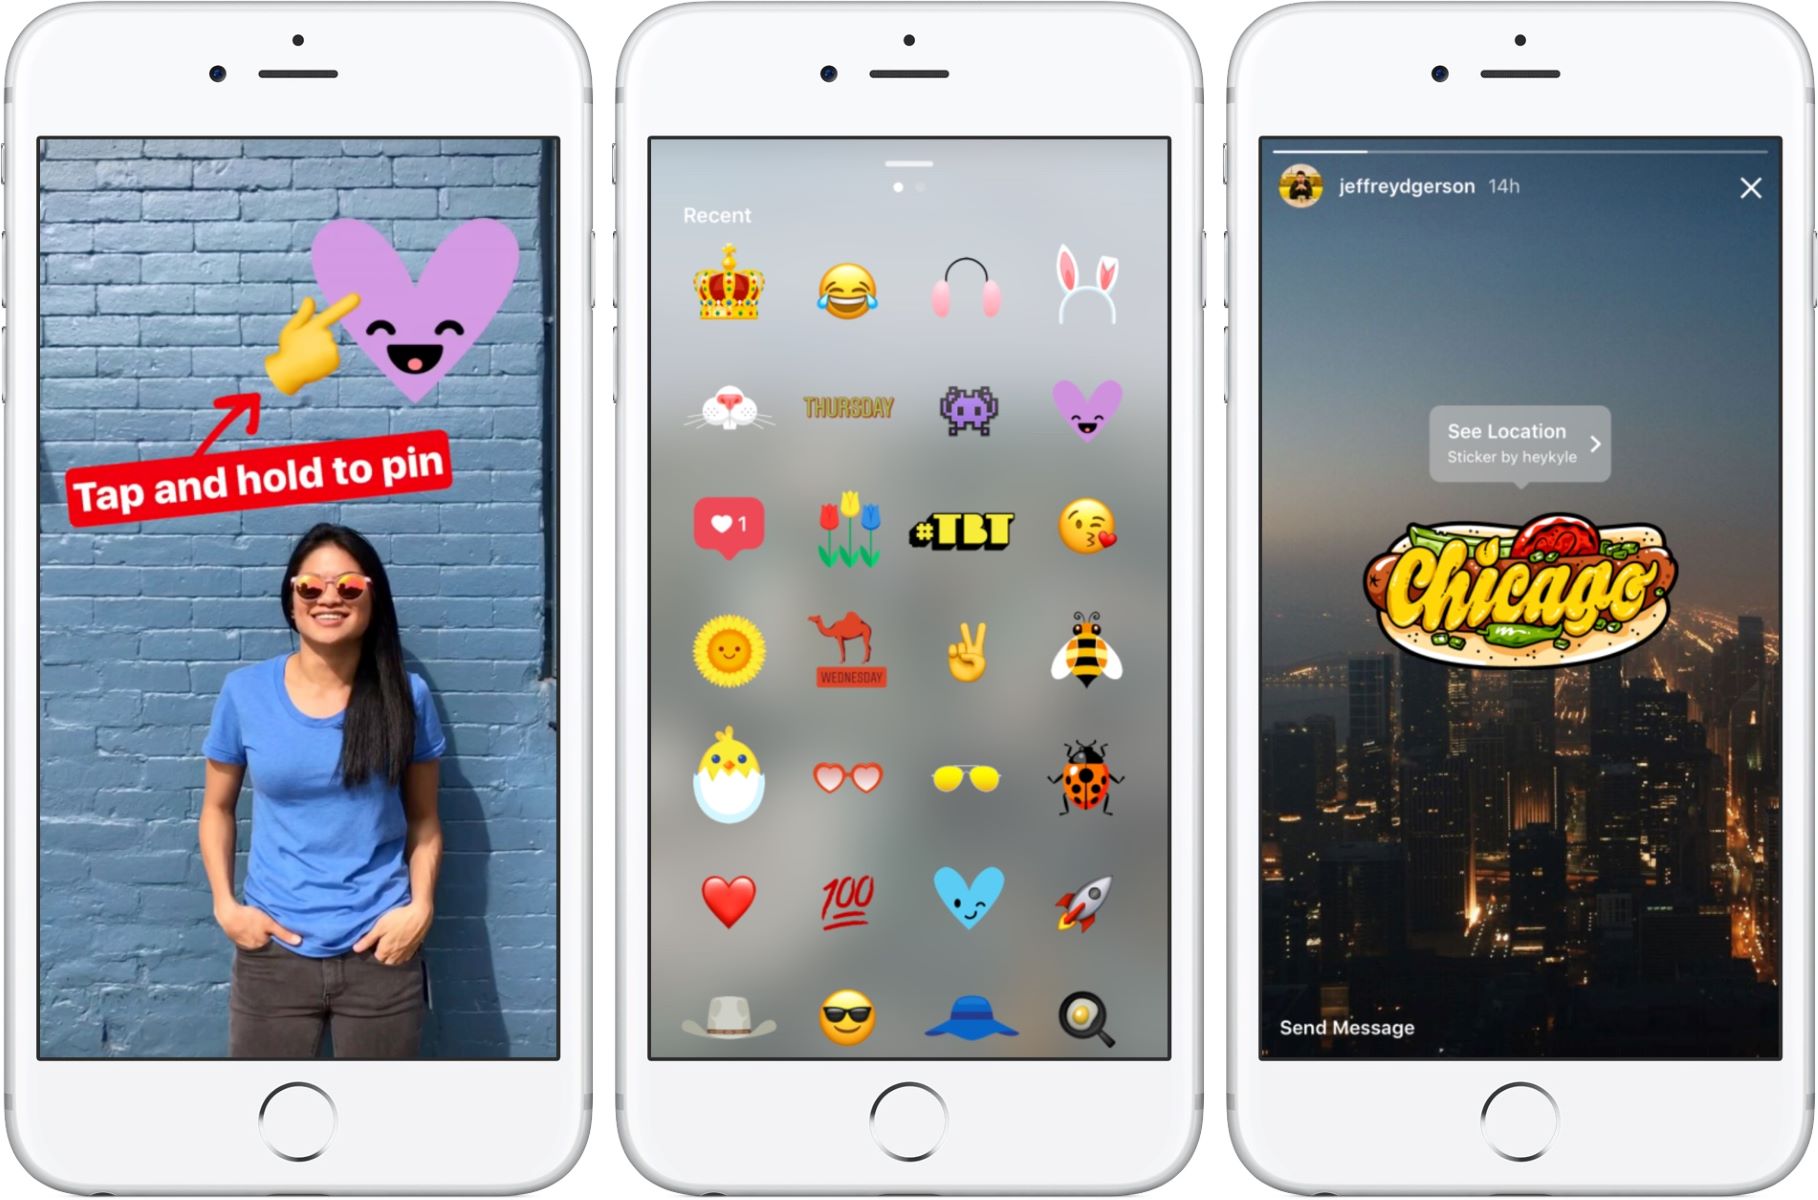 Enhancing Photos With Stickers On Your IPhone: Quick Guide